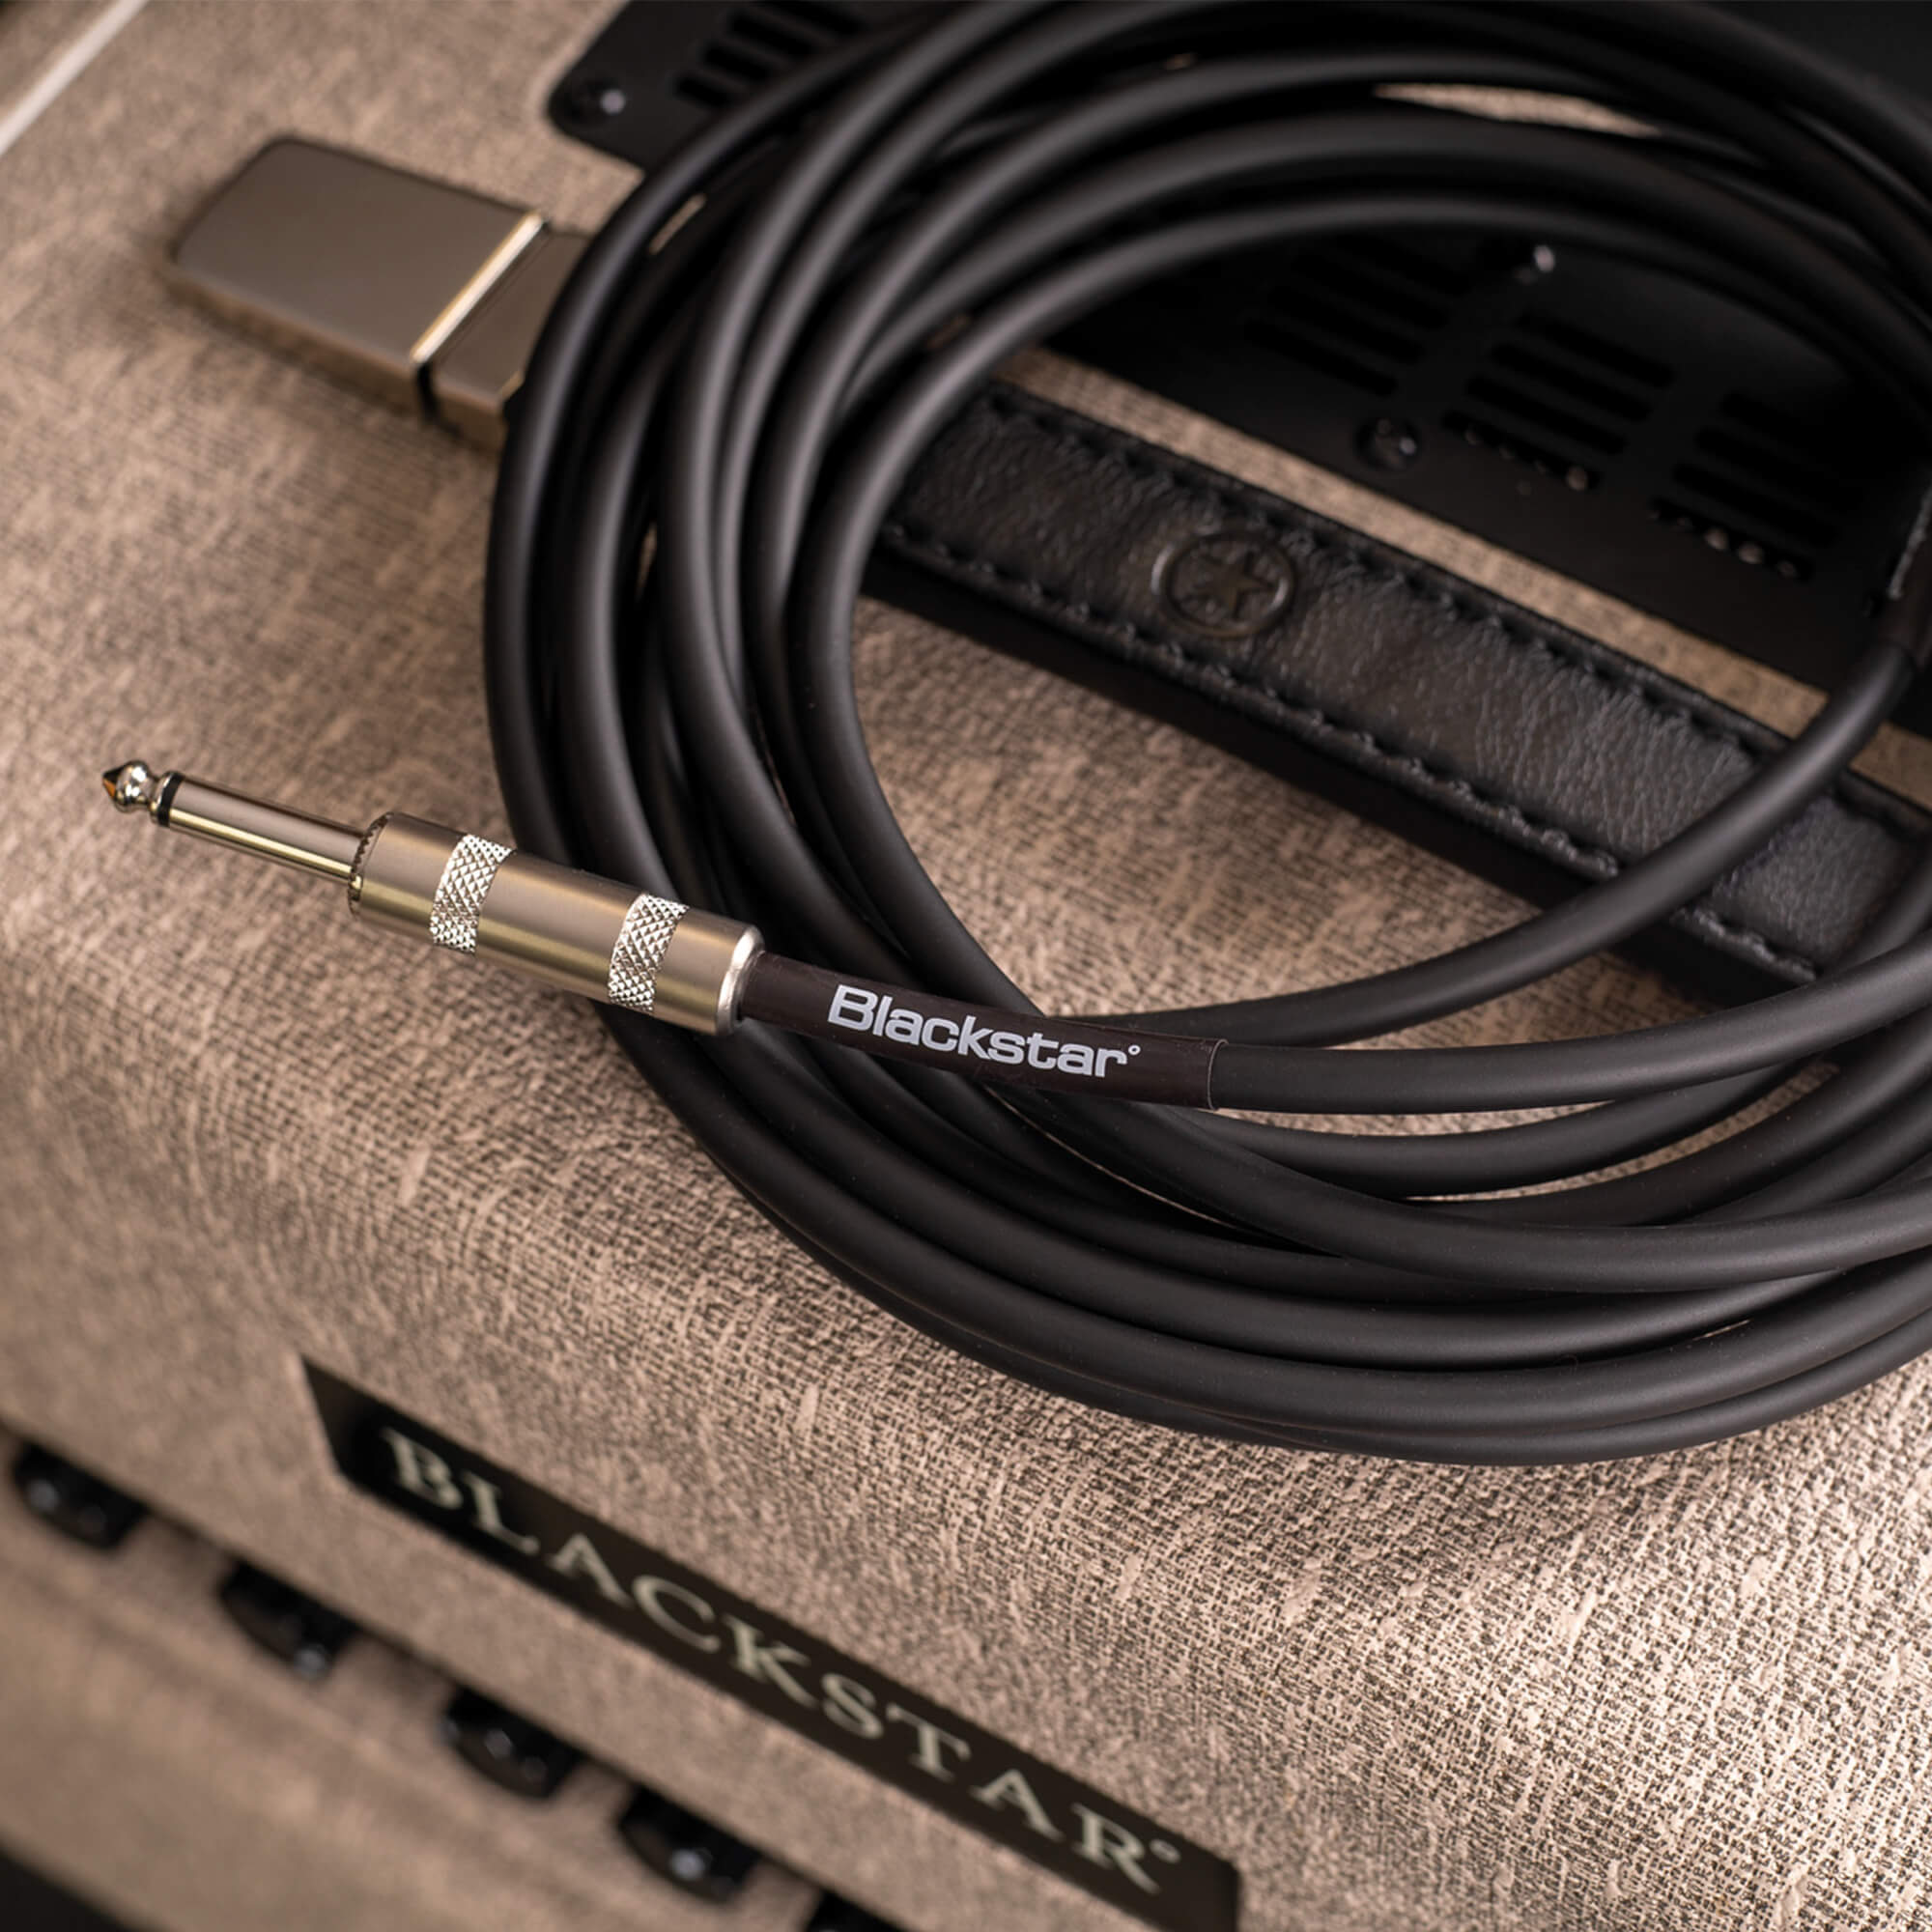 Blackstar instrument cable on top of amplifier